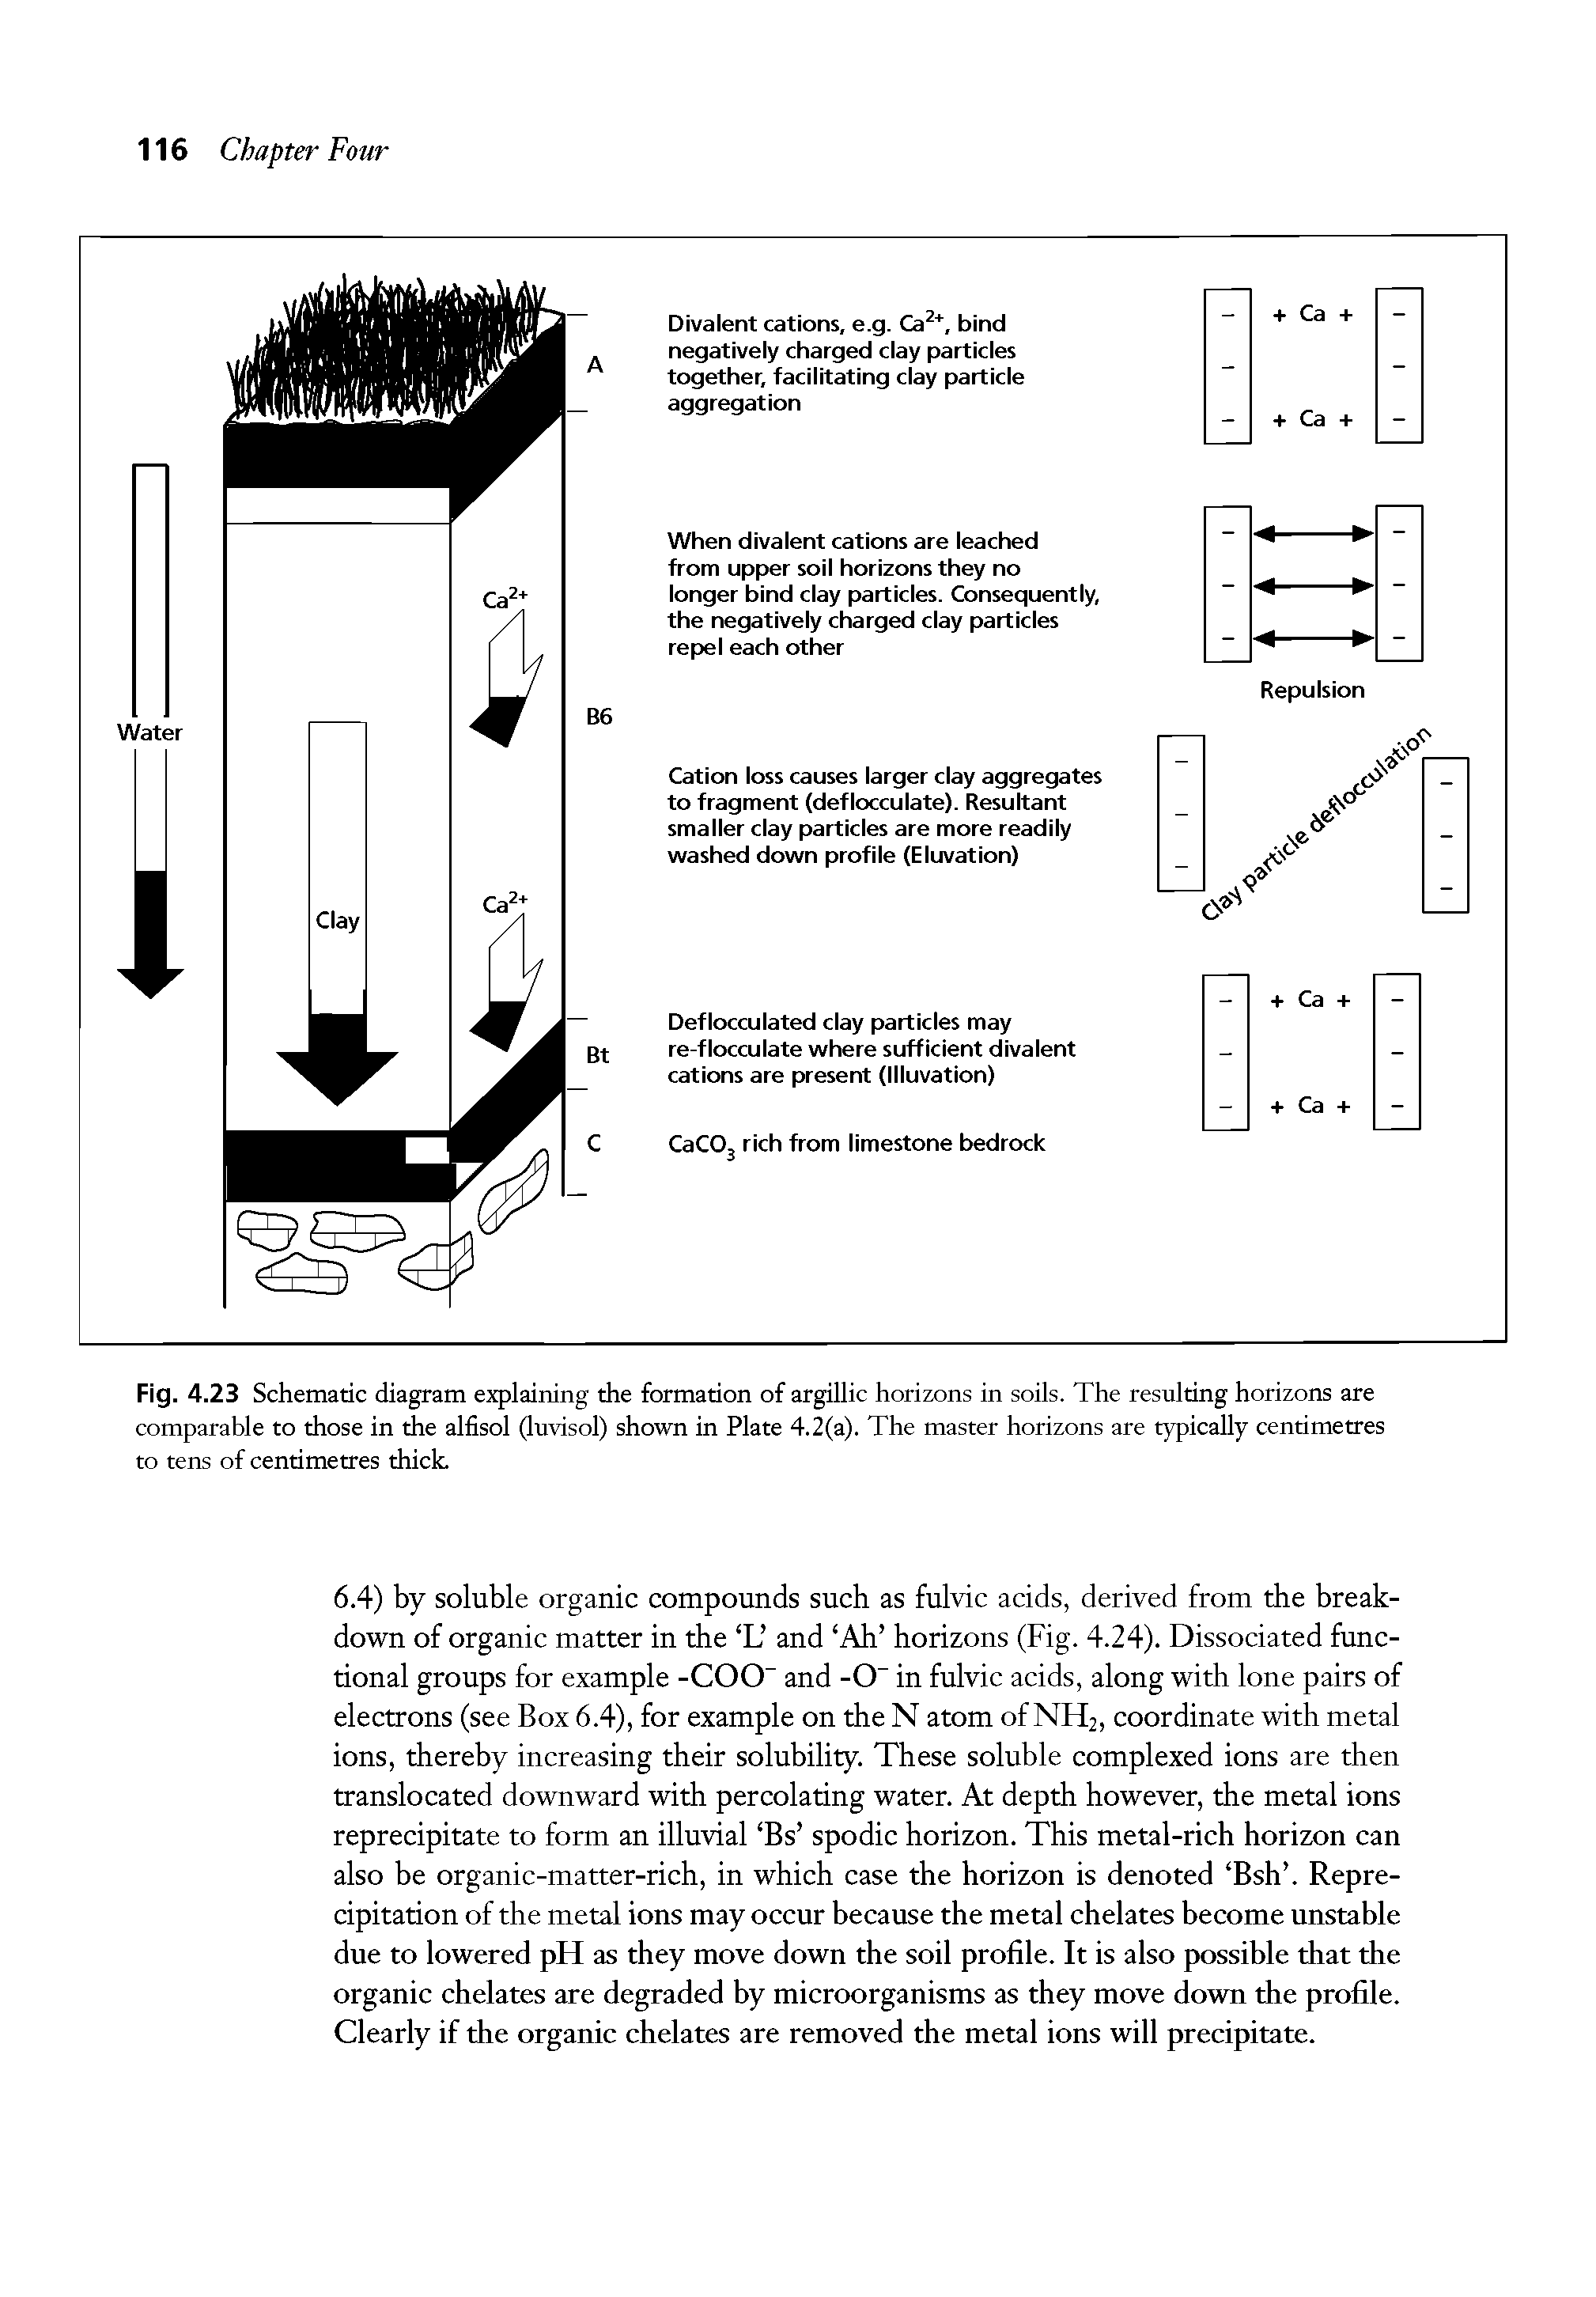 Fig. 4.23 Schematic diagram explaining the formation of argillic horizons in soils. The resulting horizons are comparable to those in the alfisol (luvisol) shown in Plate 4.2(a). The master horizons are typically centimetres to tens of centimetres thick.